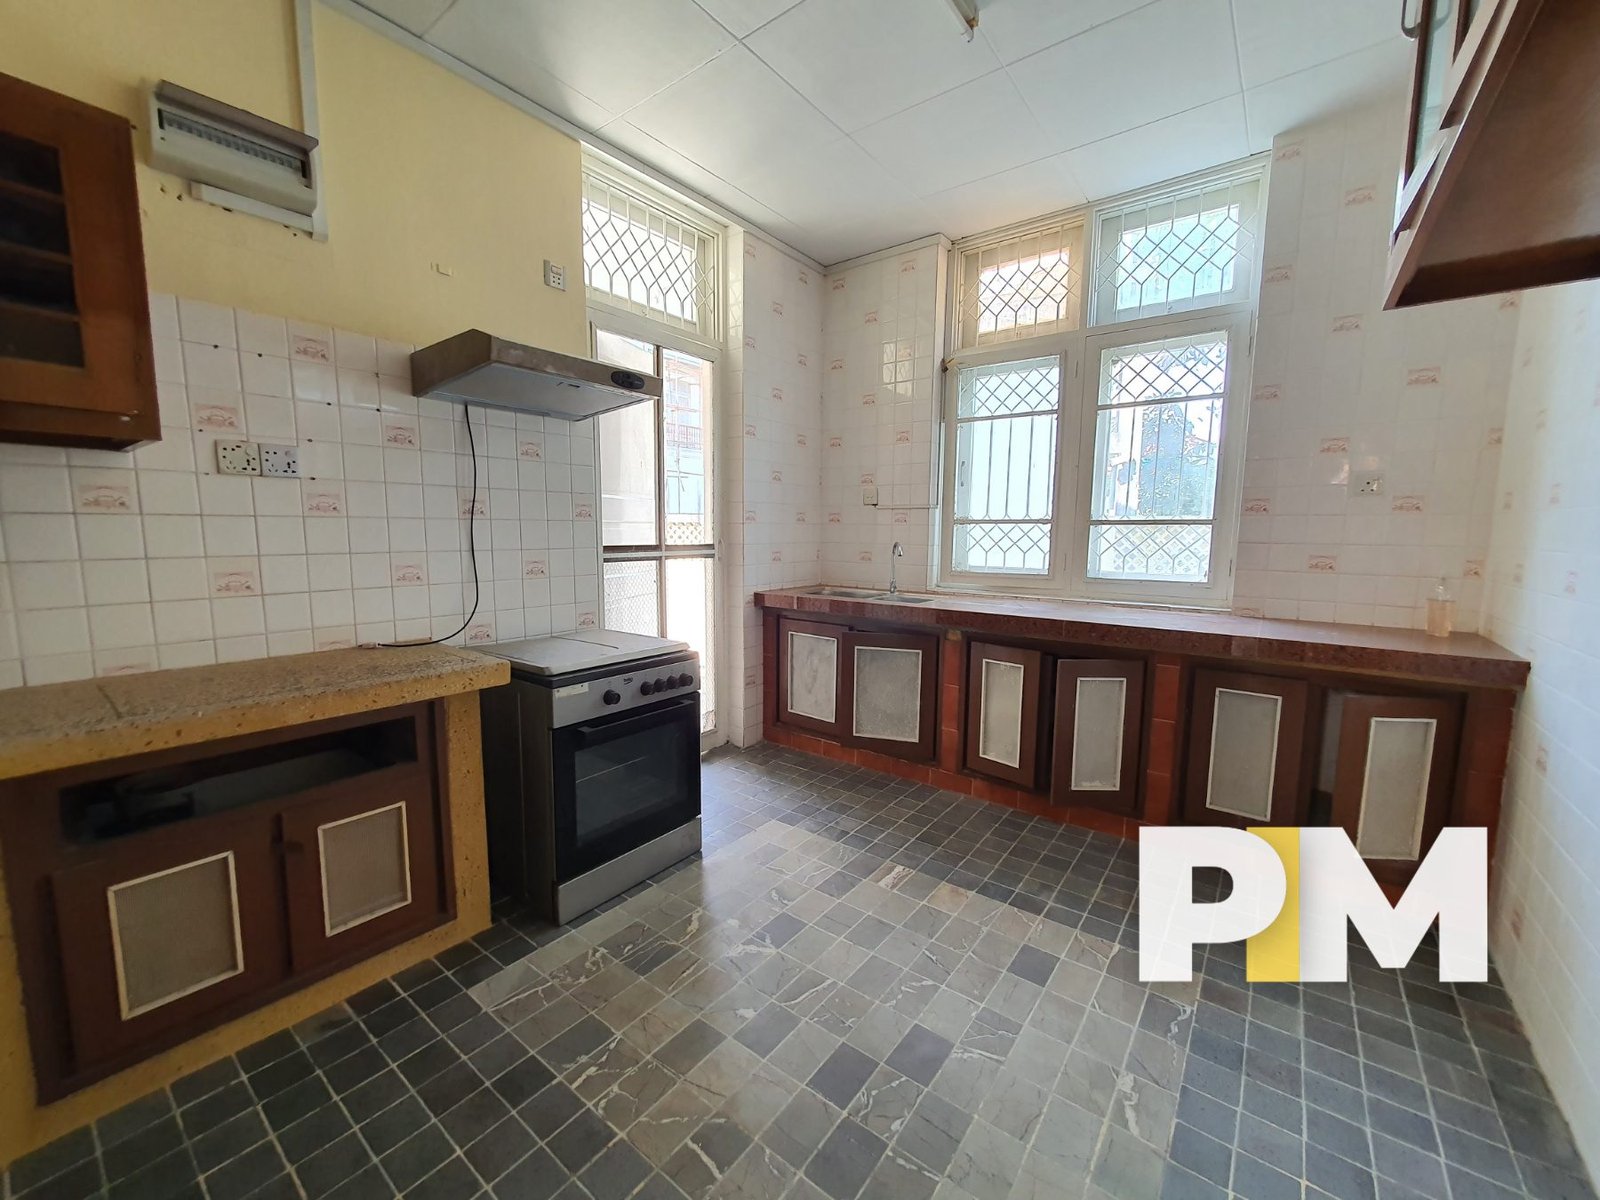 Kitchen room with microwave - Myanmar Real Estate